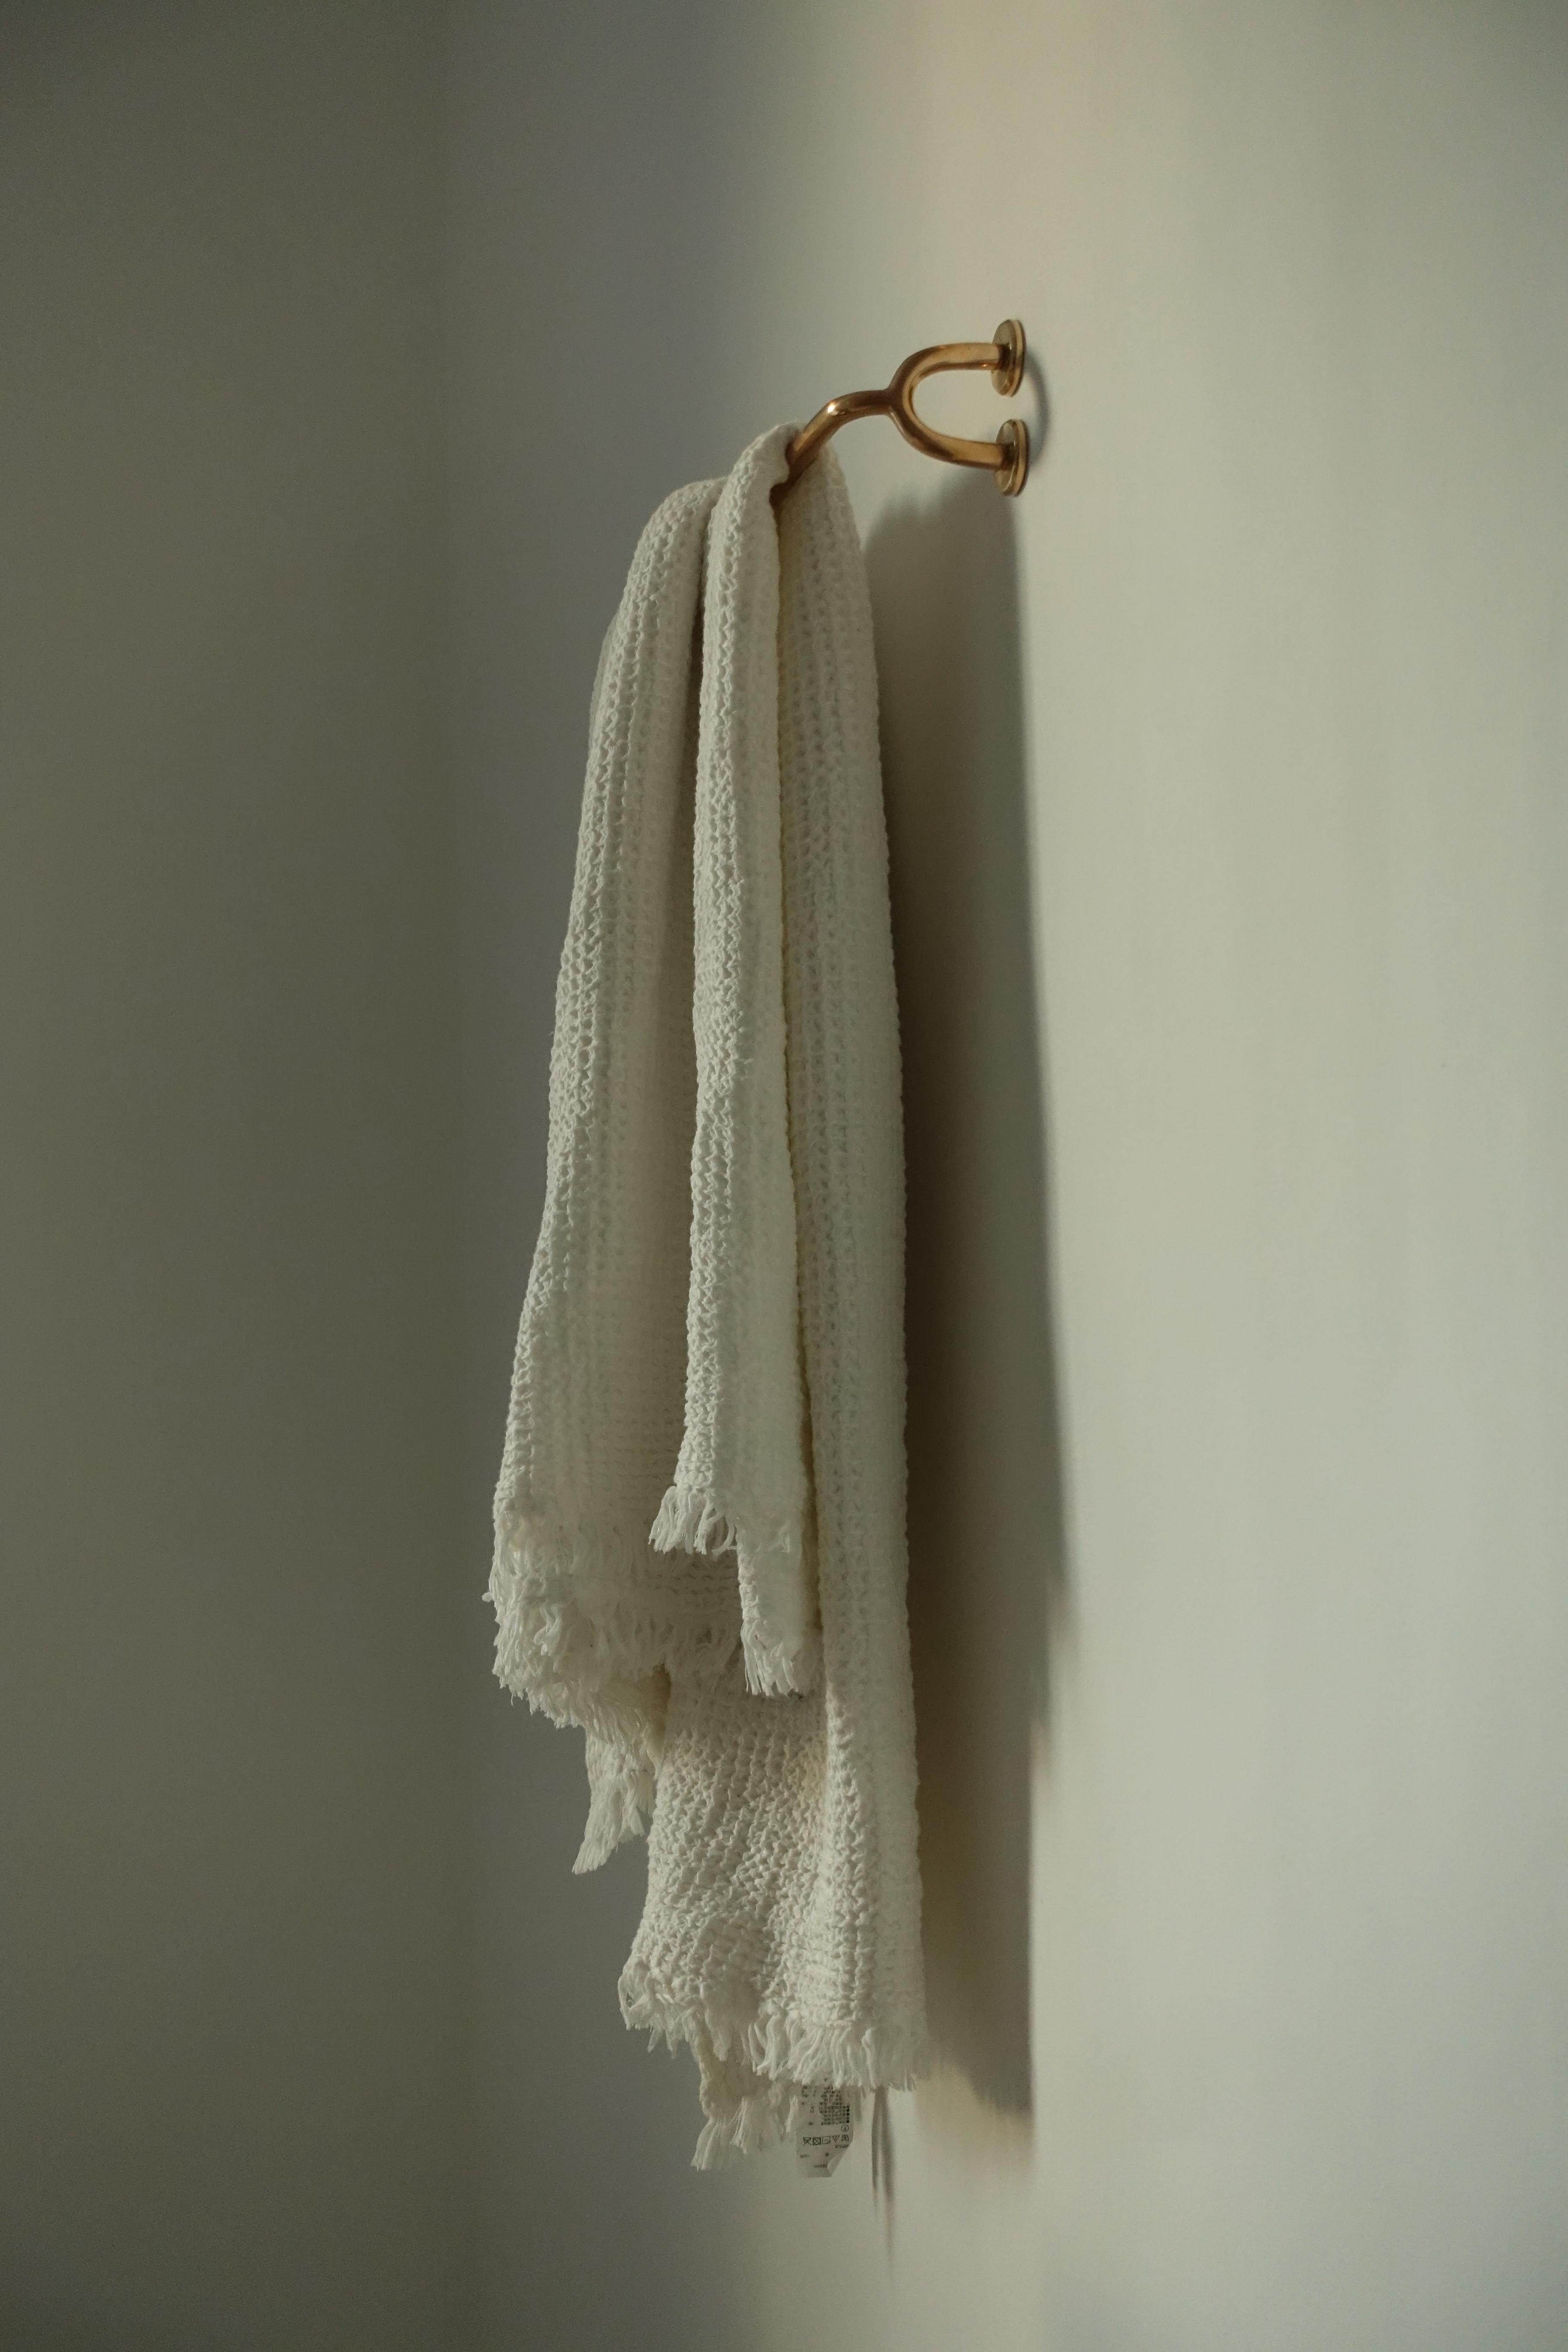 Inspired by the mountain ranges in Lauterbrunnen, Switzerland, glimpsed on a golden hour hike, the FAUNA Towel Bar embraces all that is natural. As the illuminated range peaked over meadows of wild flowers, the FAUNA Towel Bar took shape: feminine,